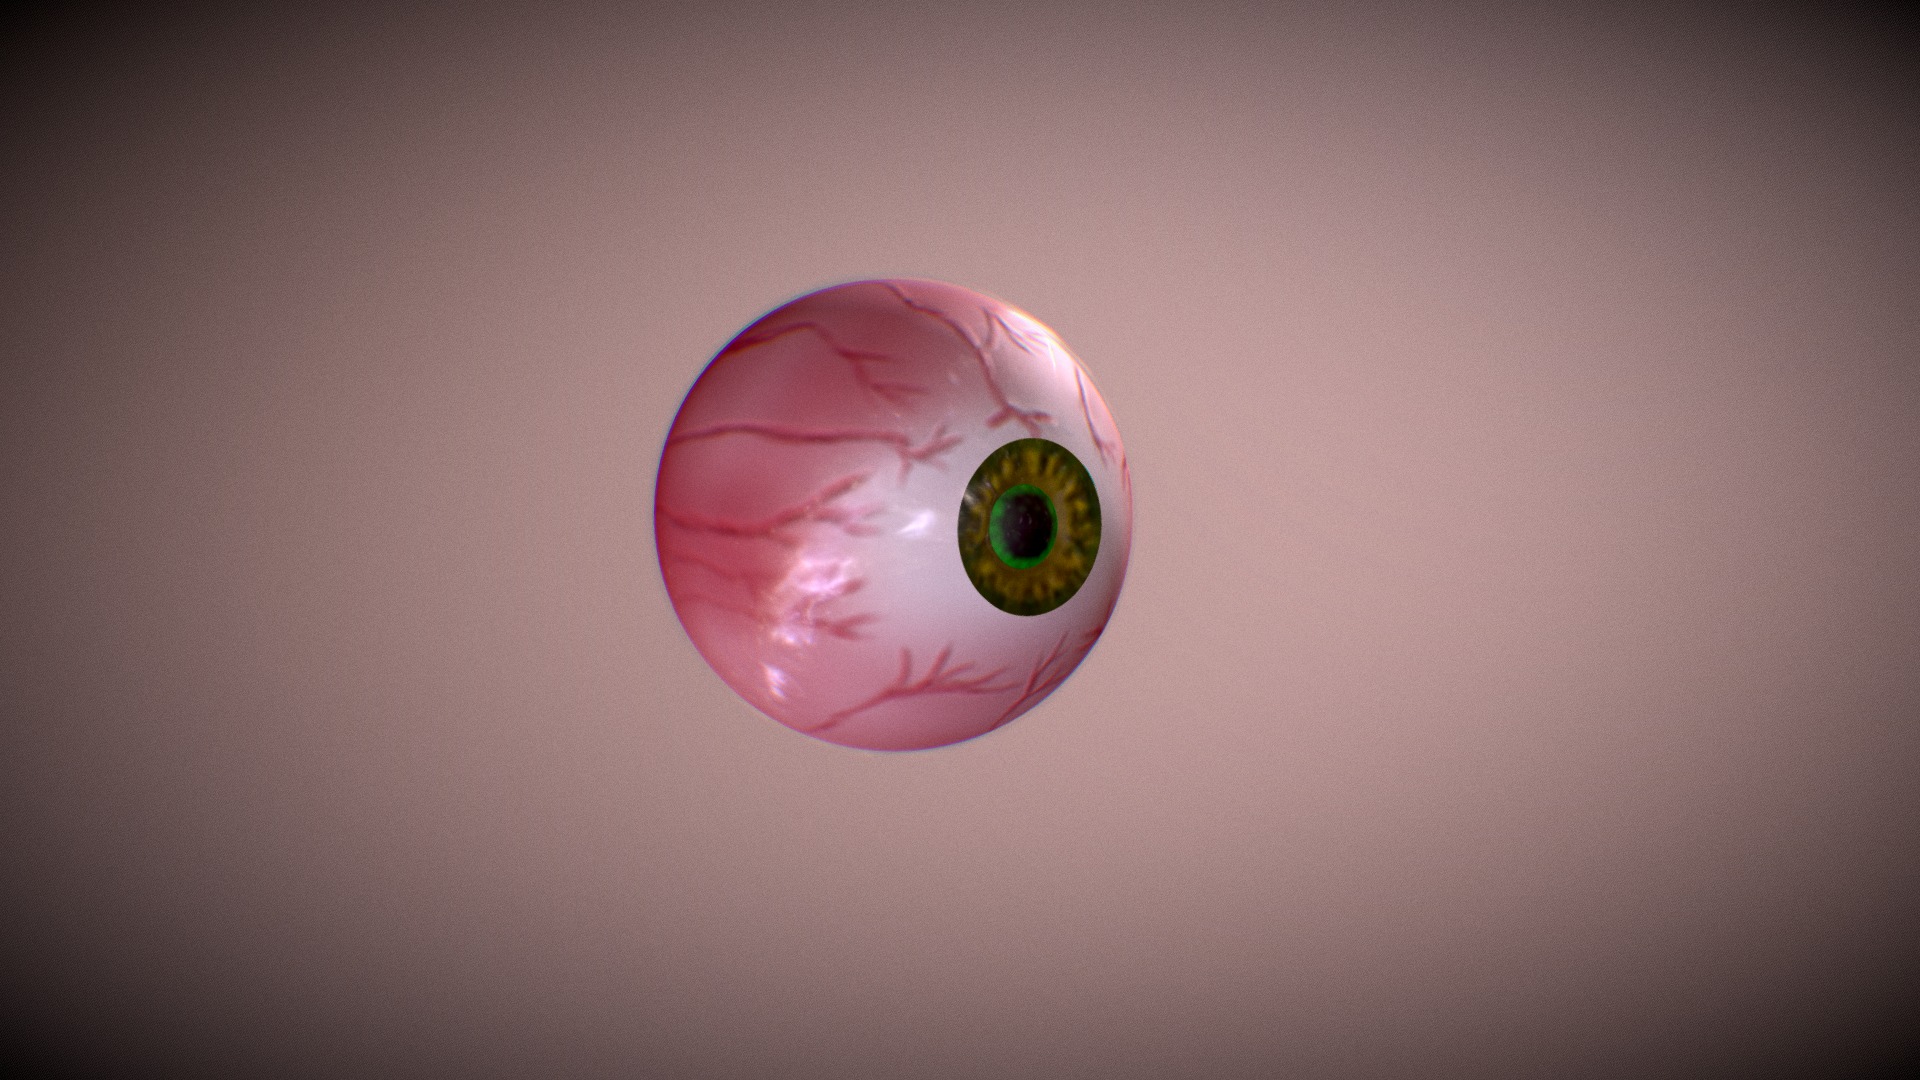 this is an eye ball that i have modeled for cyclopse monster character 3d model